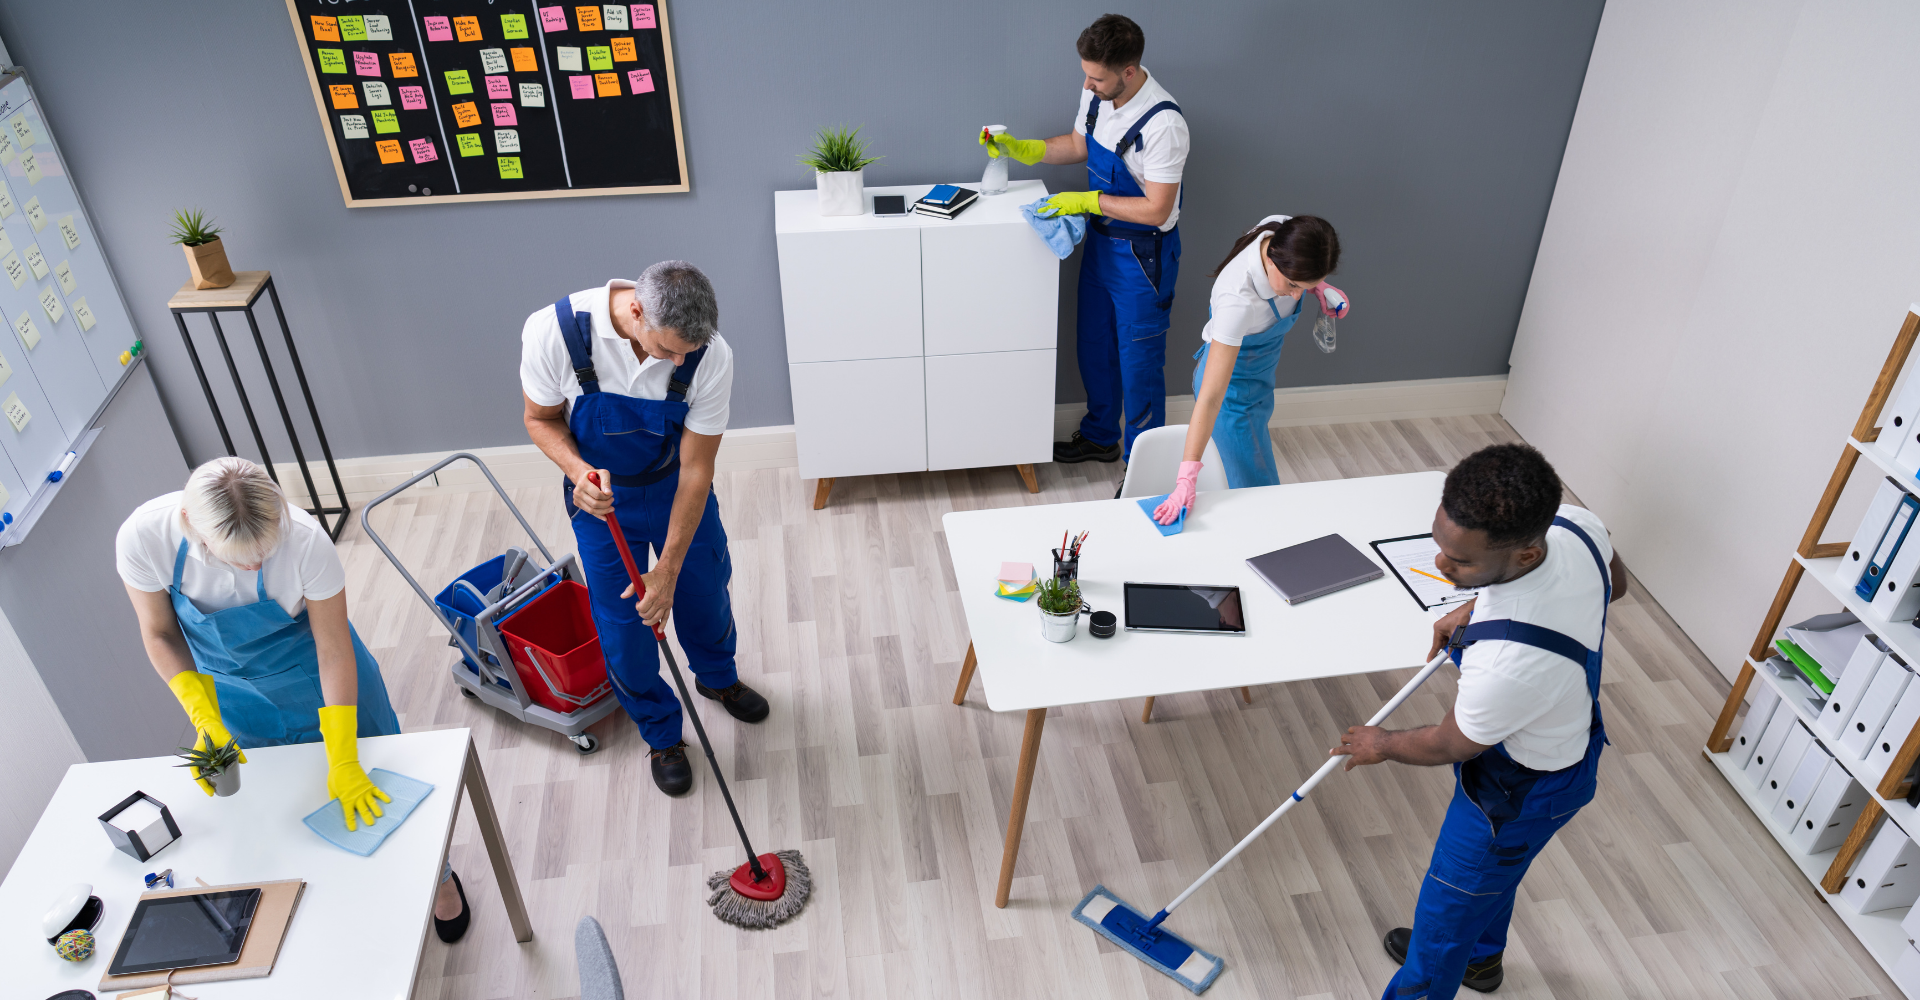 janitorial services team of five cleaning up an office